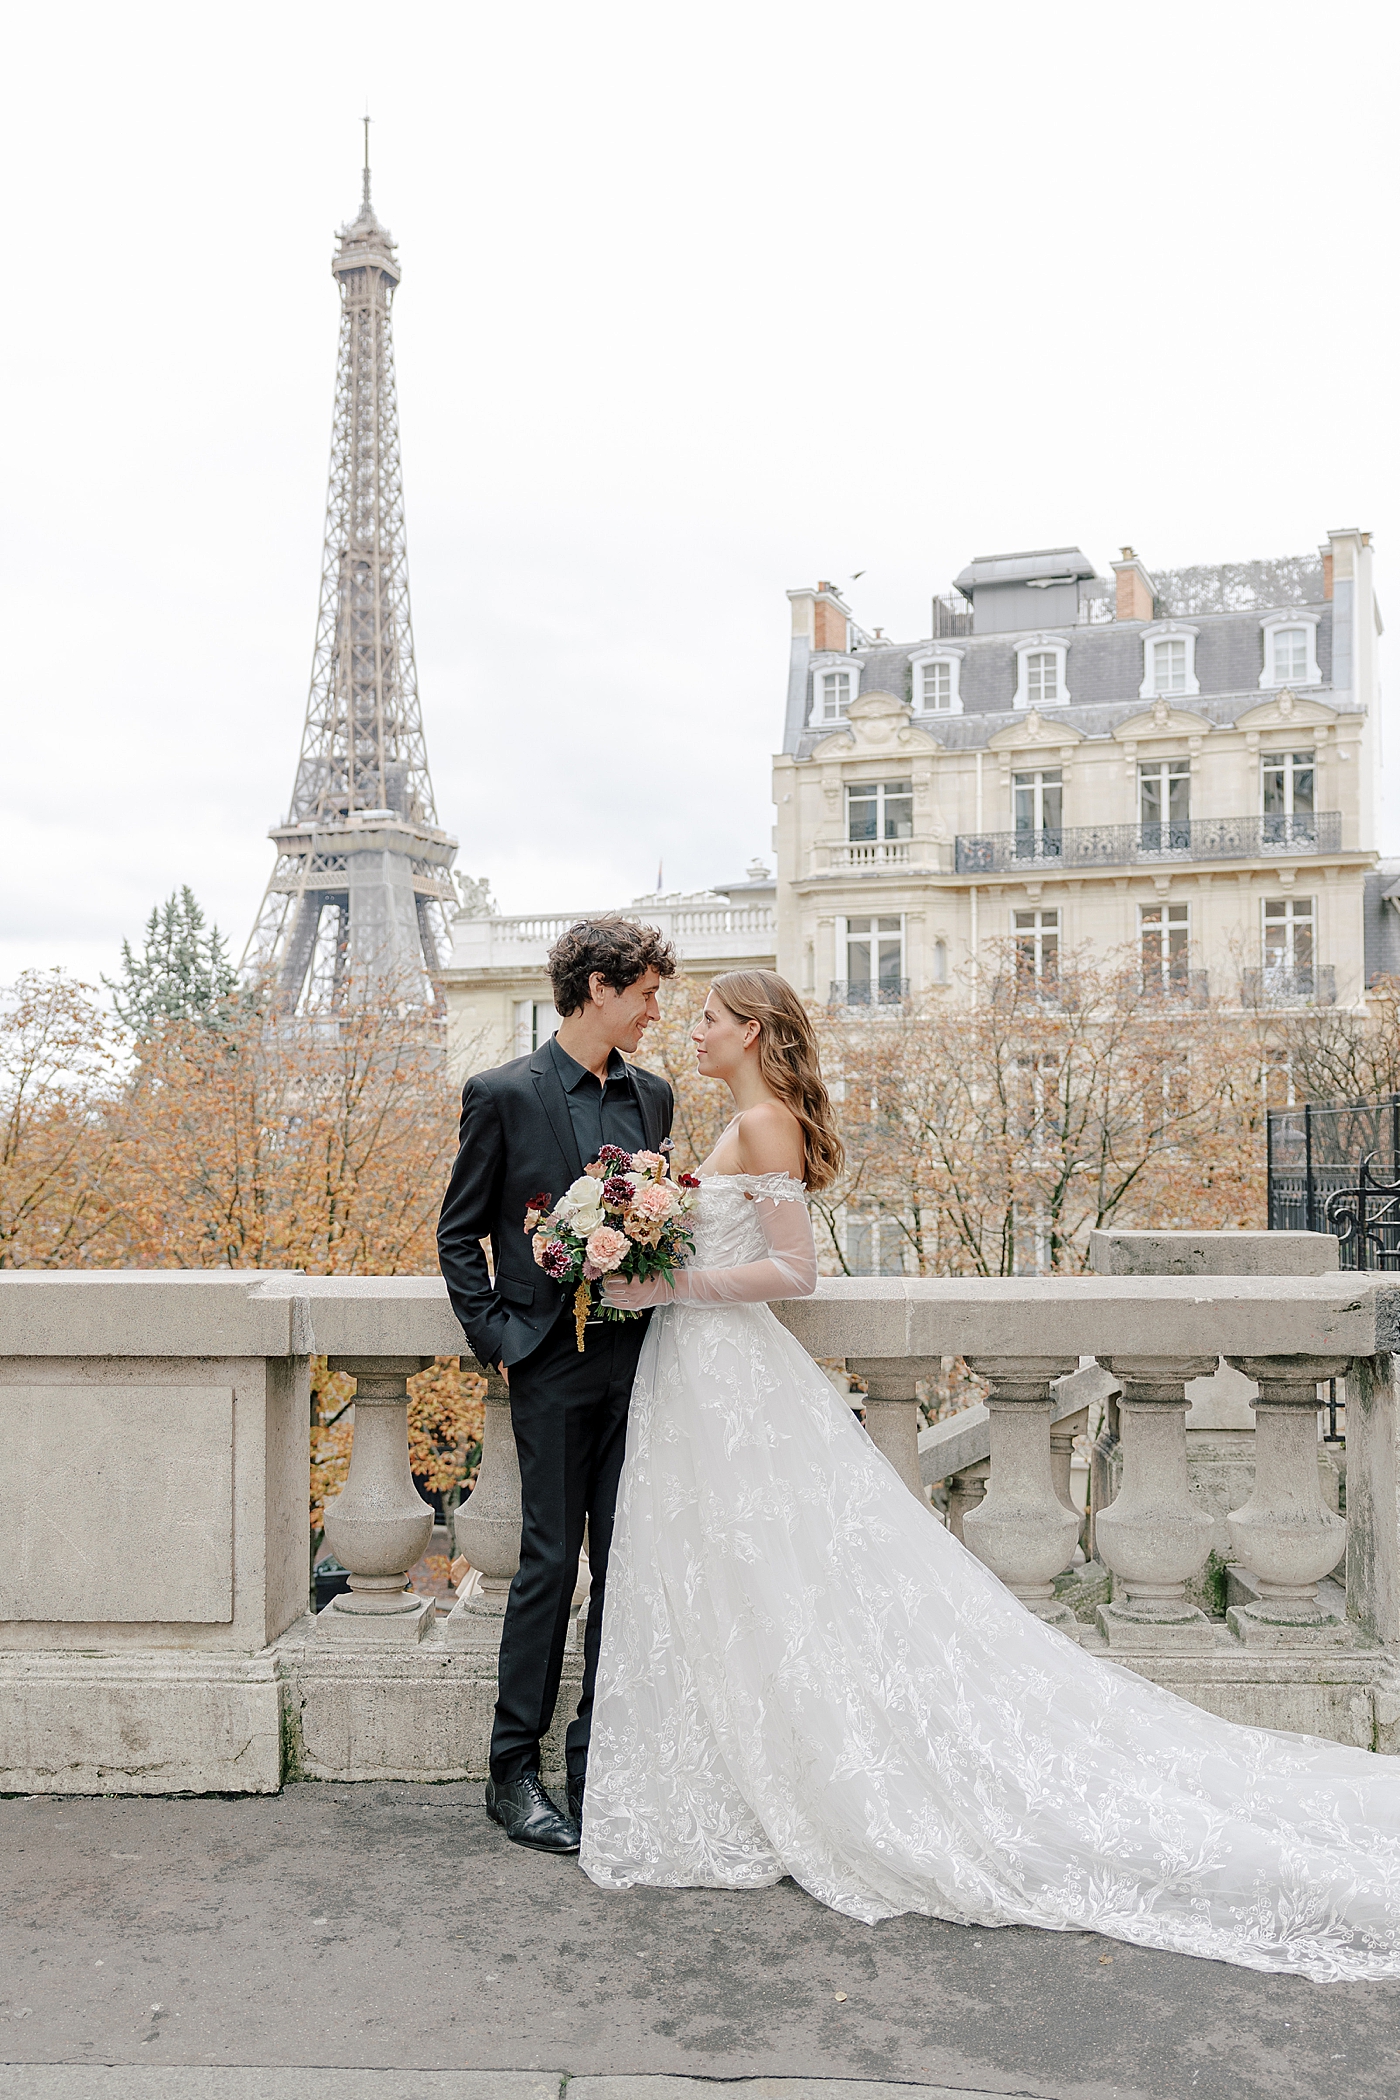 Image of a bride and groom embracing in Paris with the Eiffel tower in the background | Image by Hope Helmuth Photography